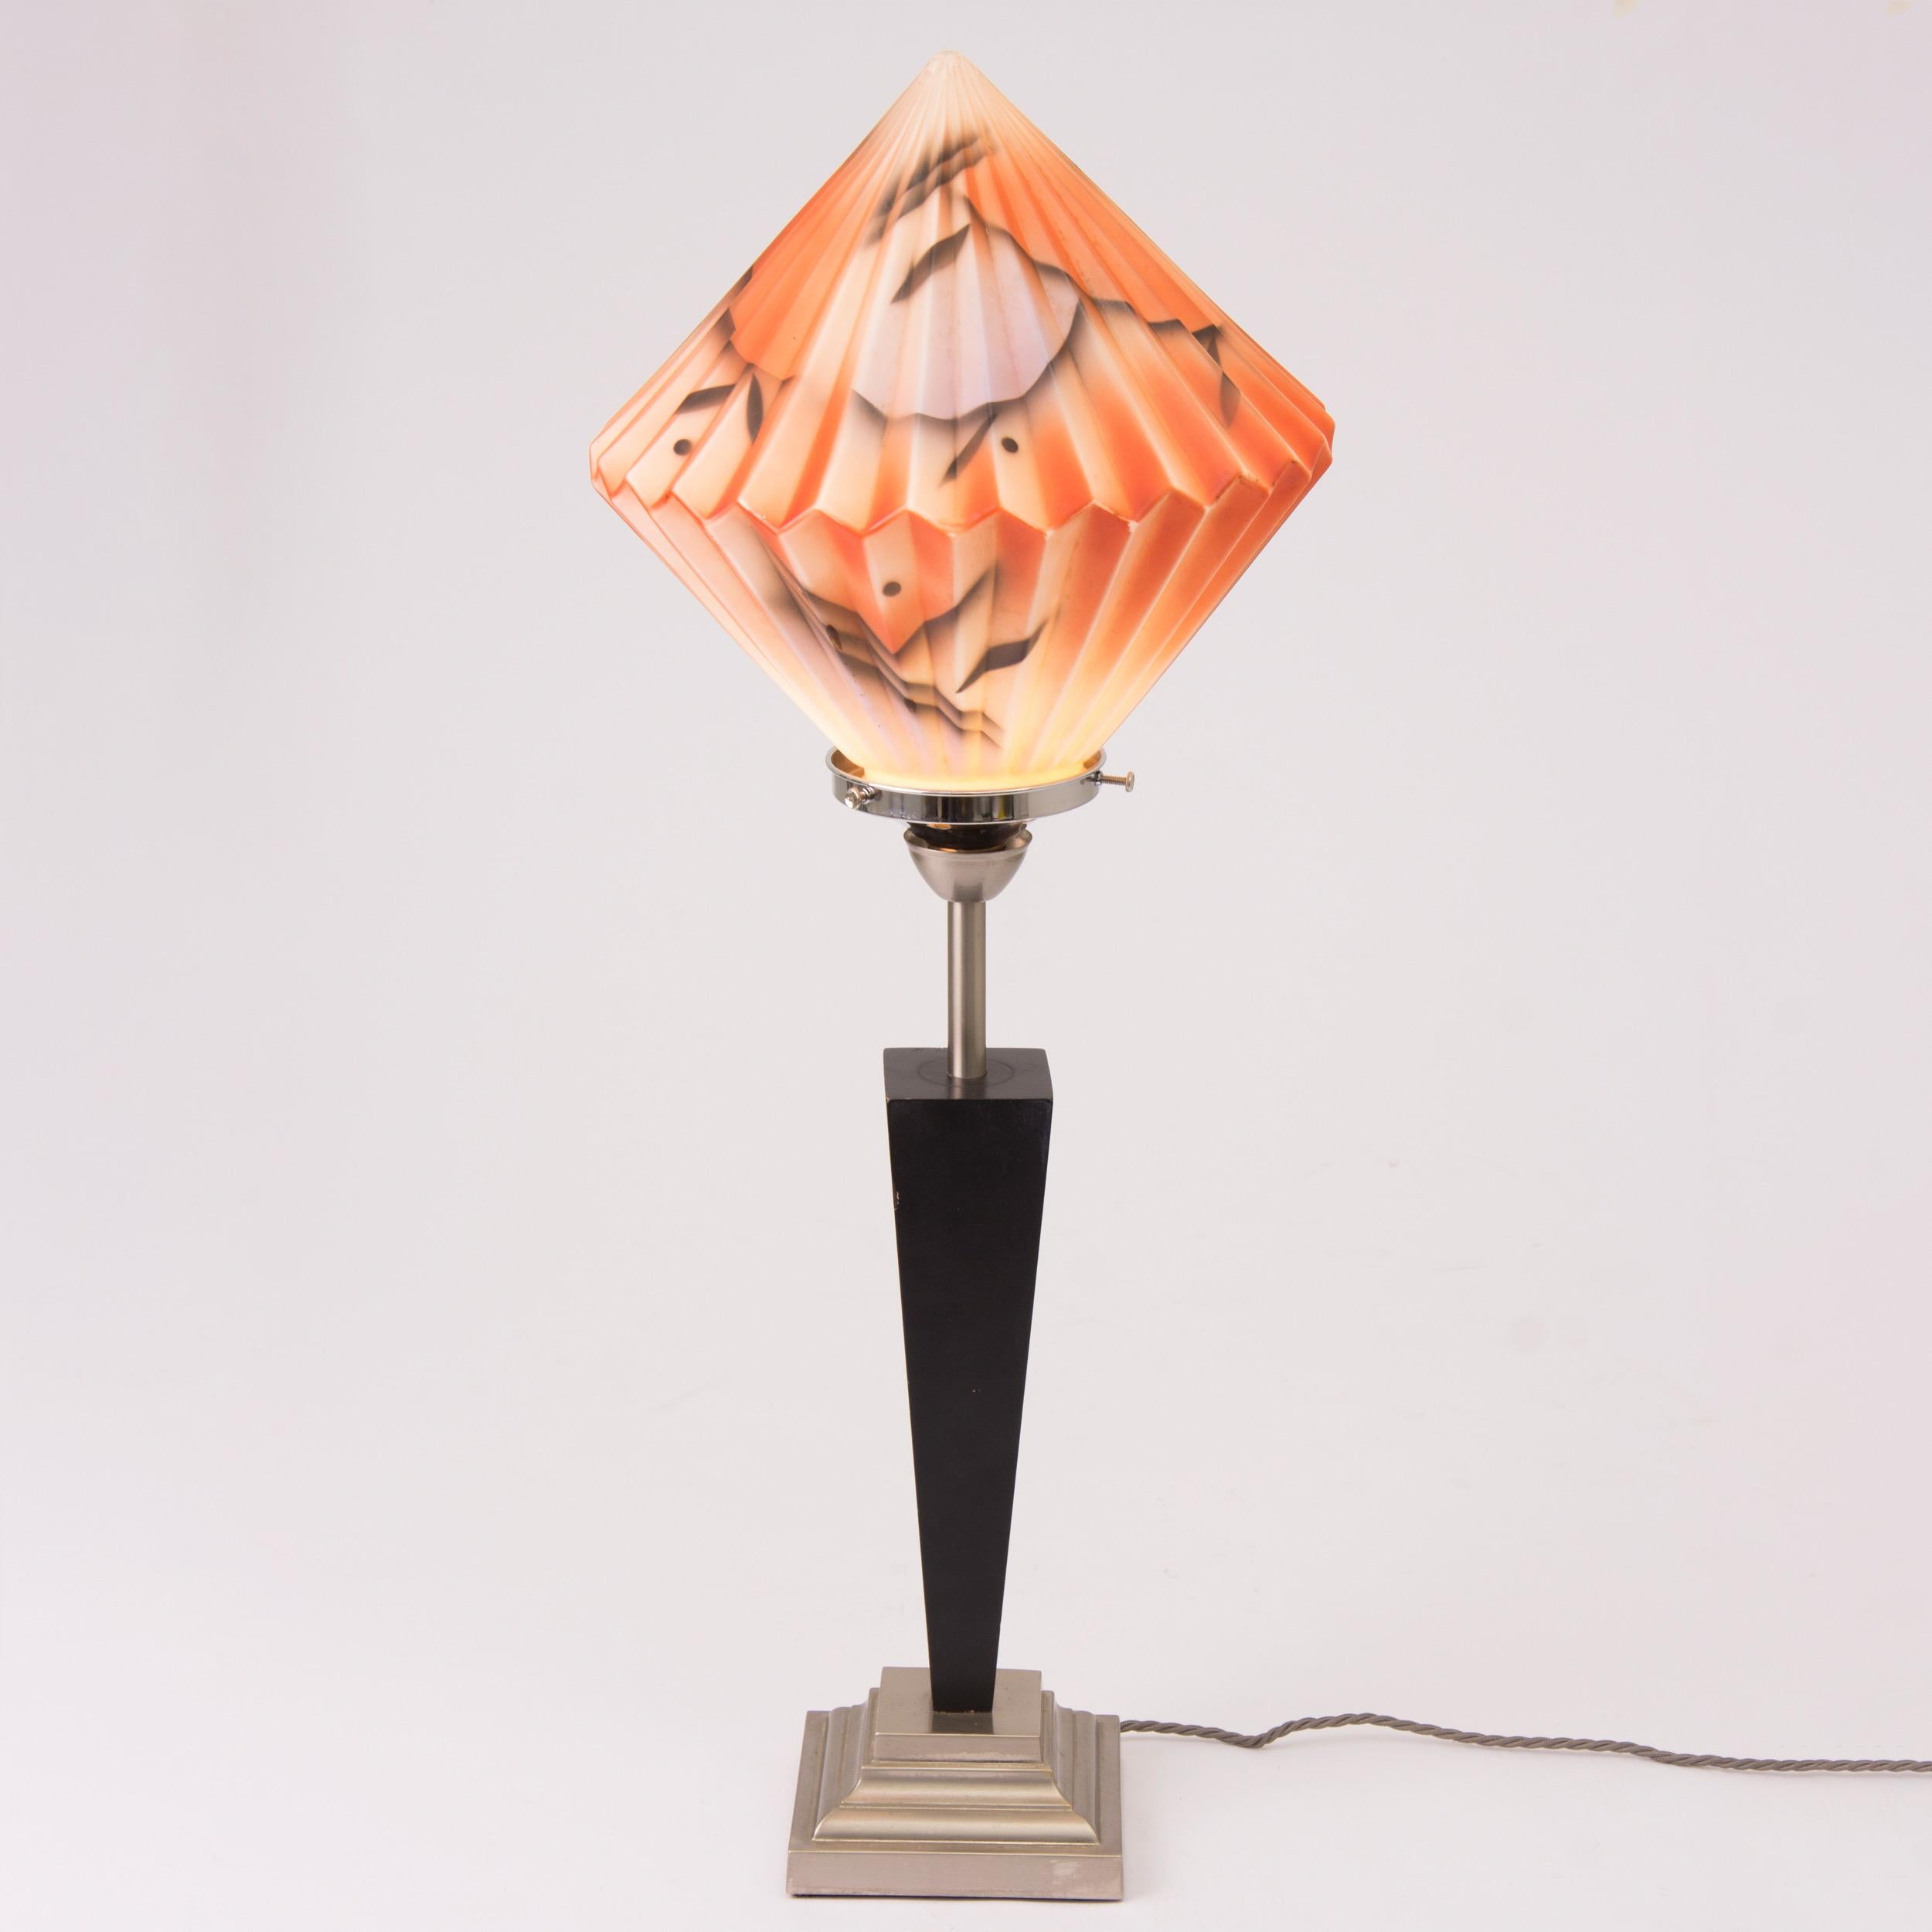 Large Art Deco table lamp with a pleated diamond shape glass shade with a painted abstract design, on a tall tapered column.
British, circa 1930.
Measures: H 79cm, W 31cm, D 31cm.